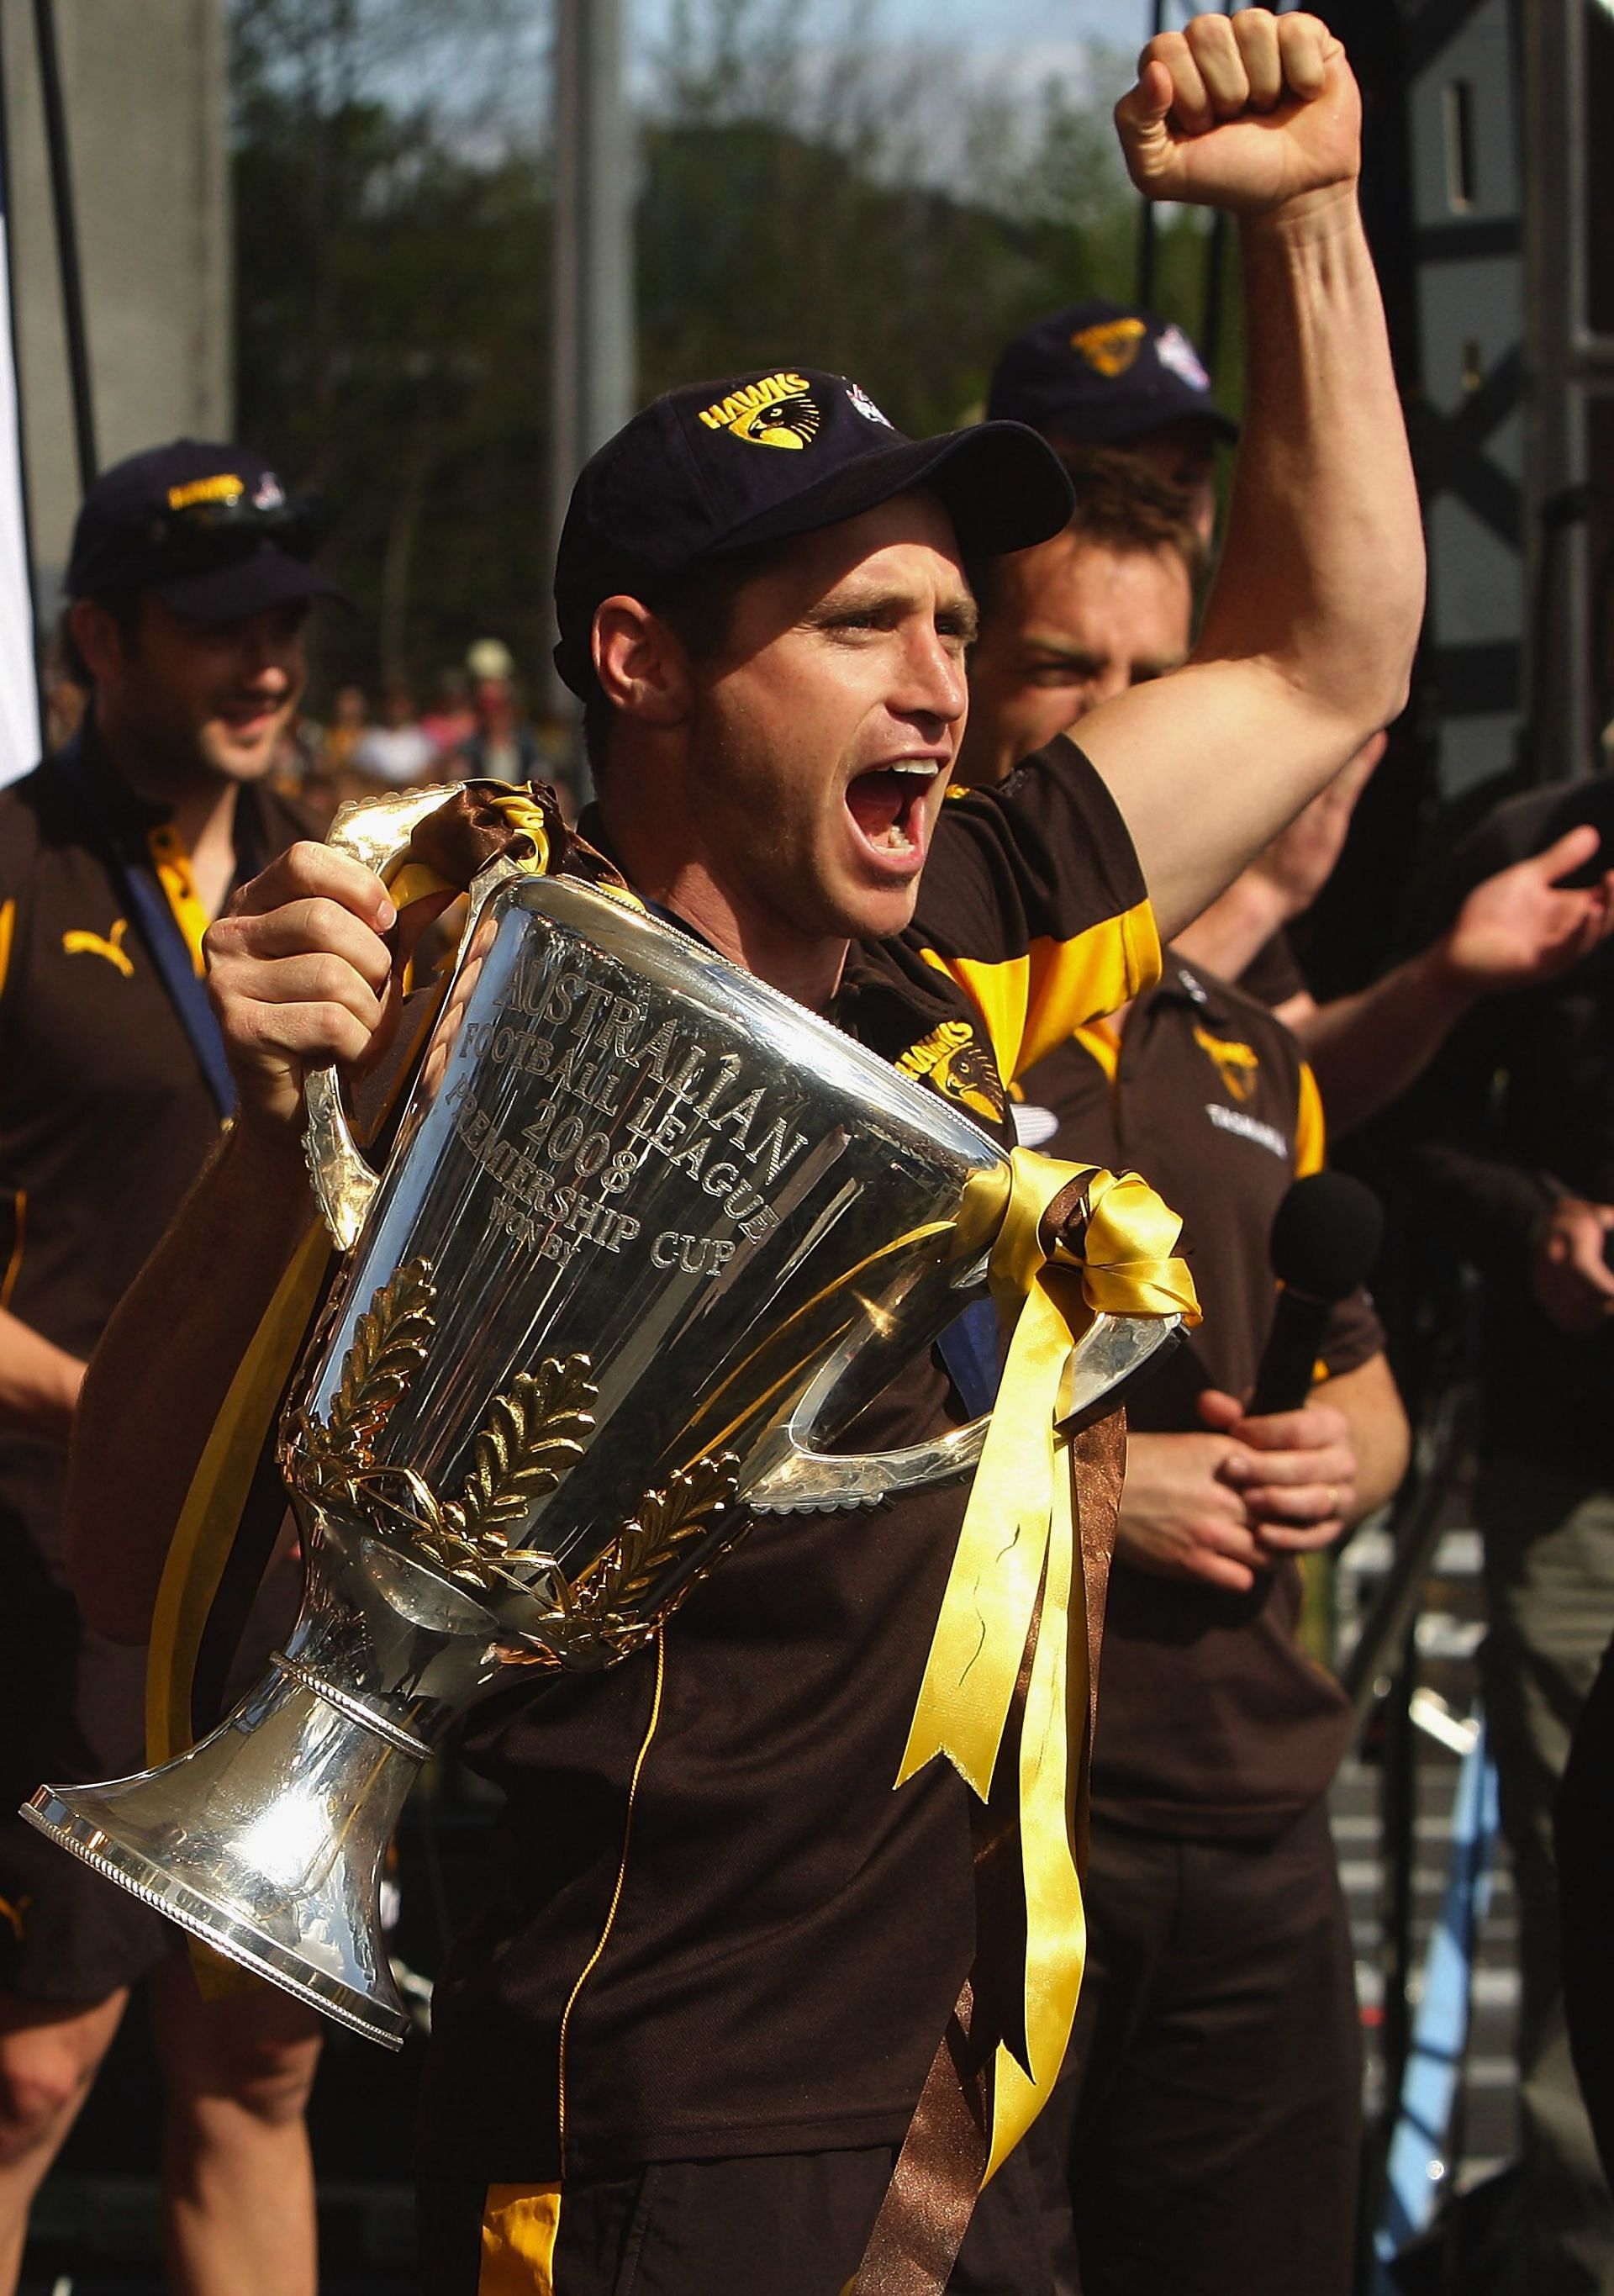 Shane Crawford of the Hawks holds up the 2008 AFL Premiership Cup